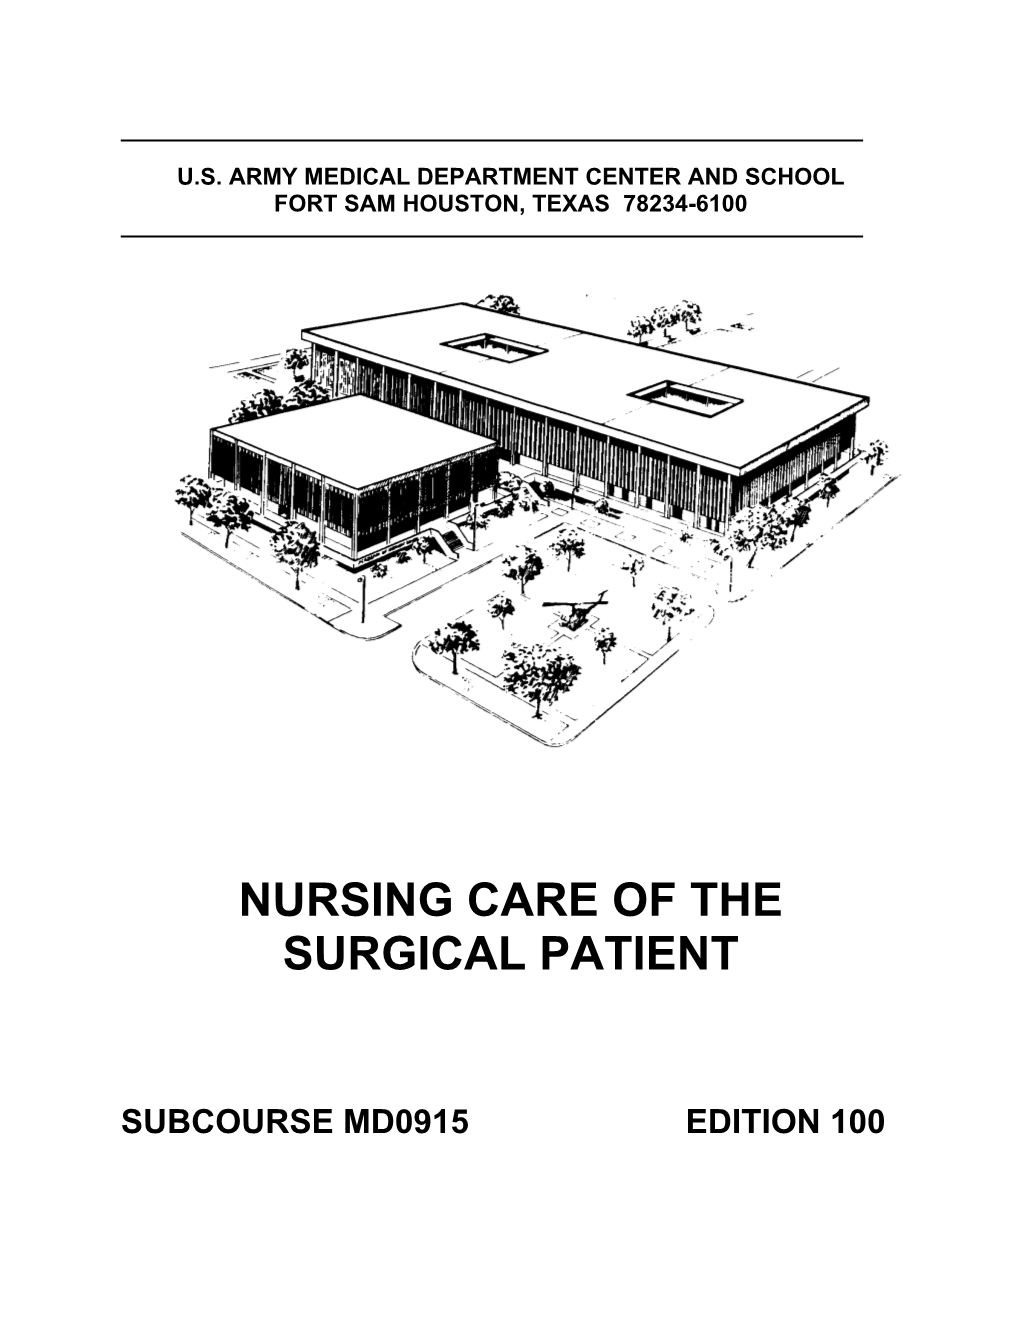 Nursing Care of the Surgical Patient